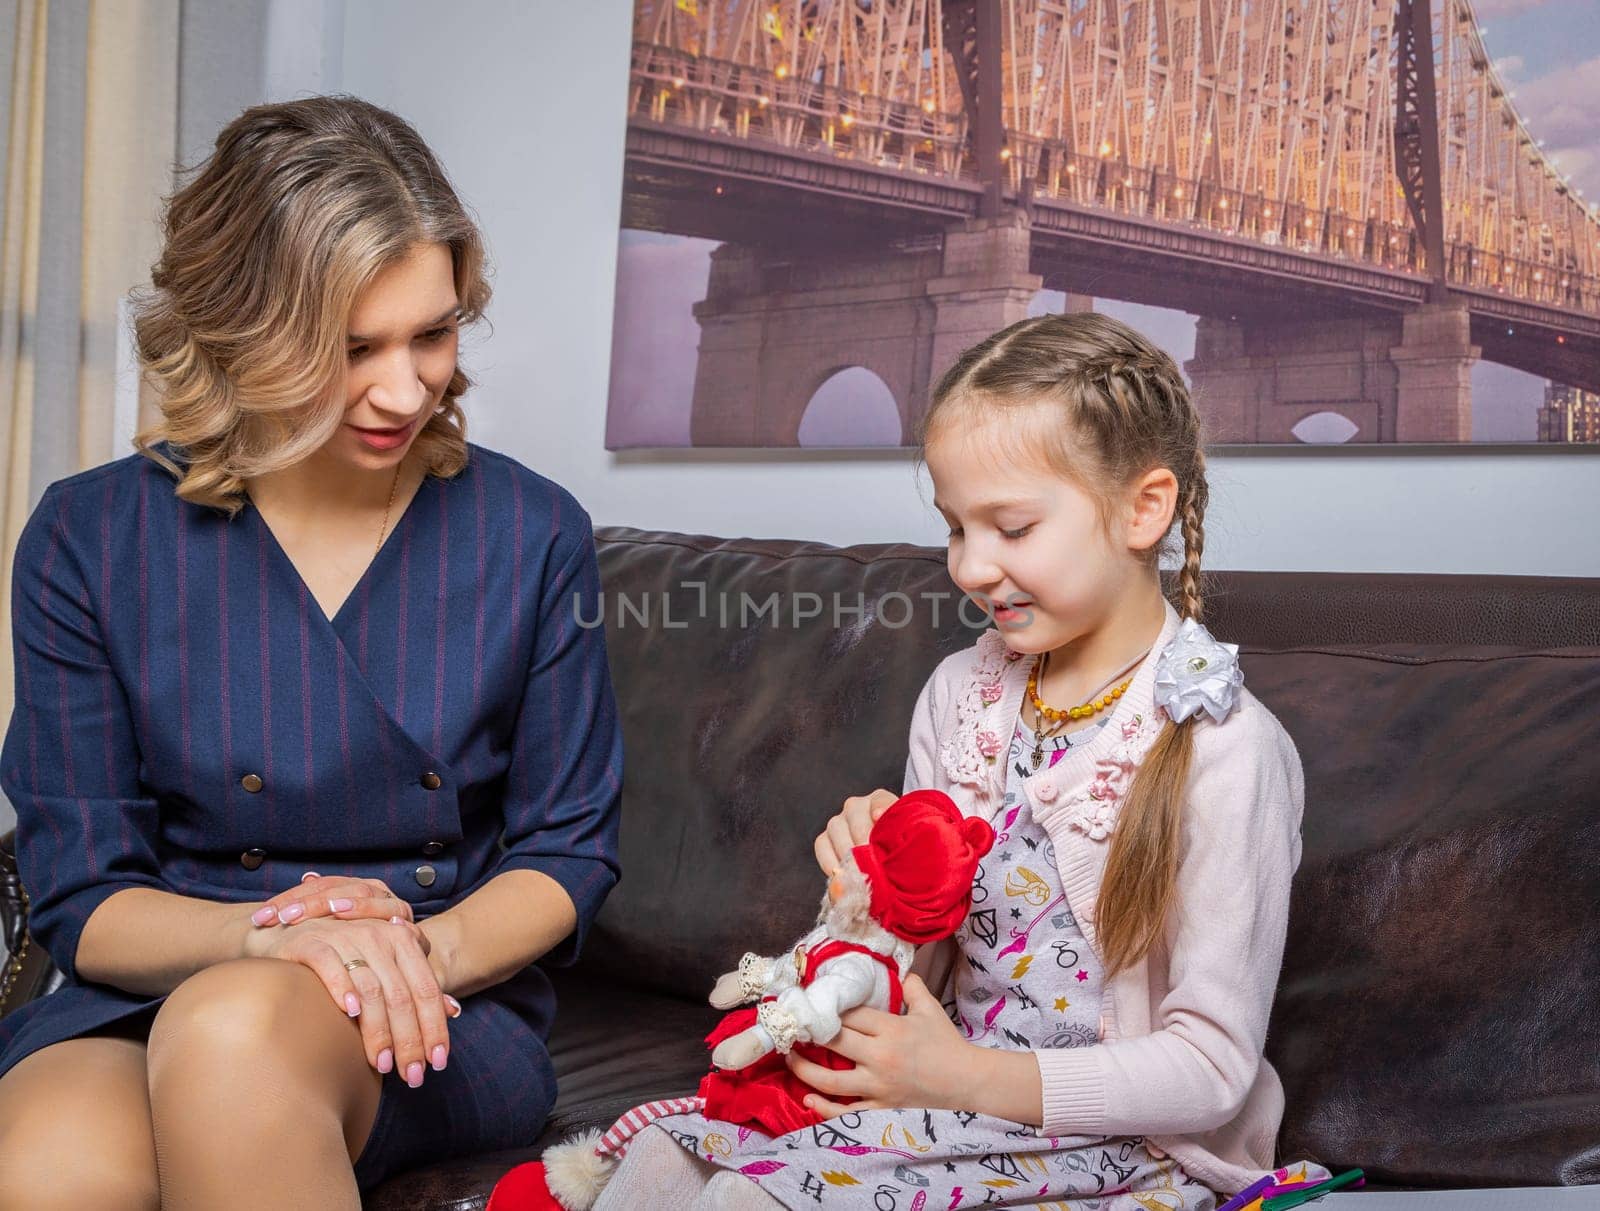 The girl psychologist plays a puppet character game with the child. by Yurich32